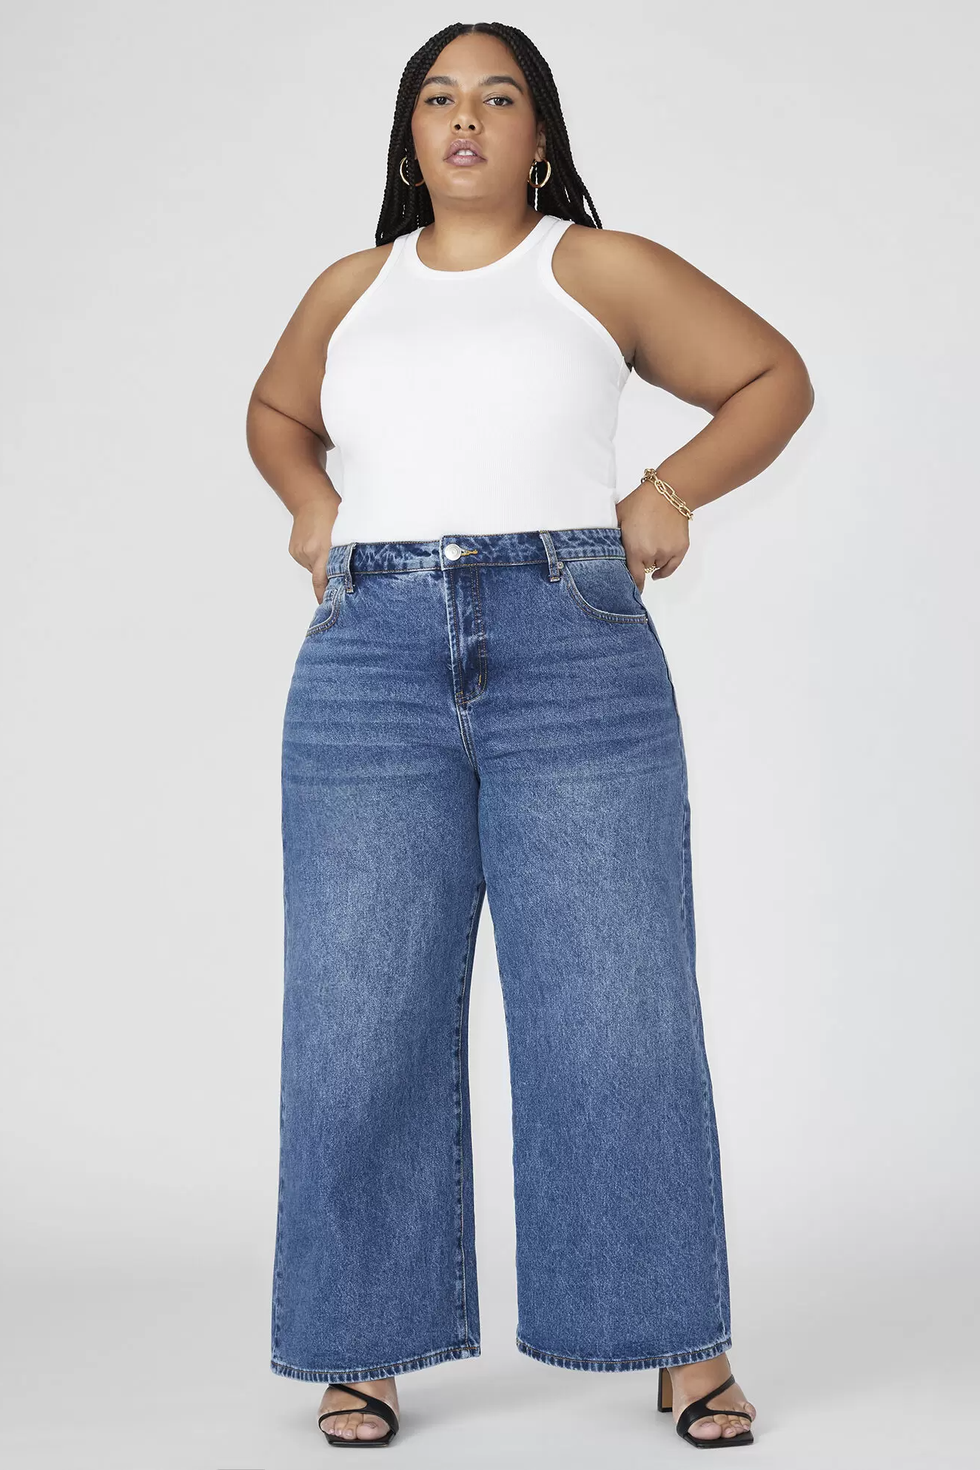 The Best Wide-Leg Jeans for Curvy and Petite Women